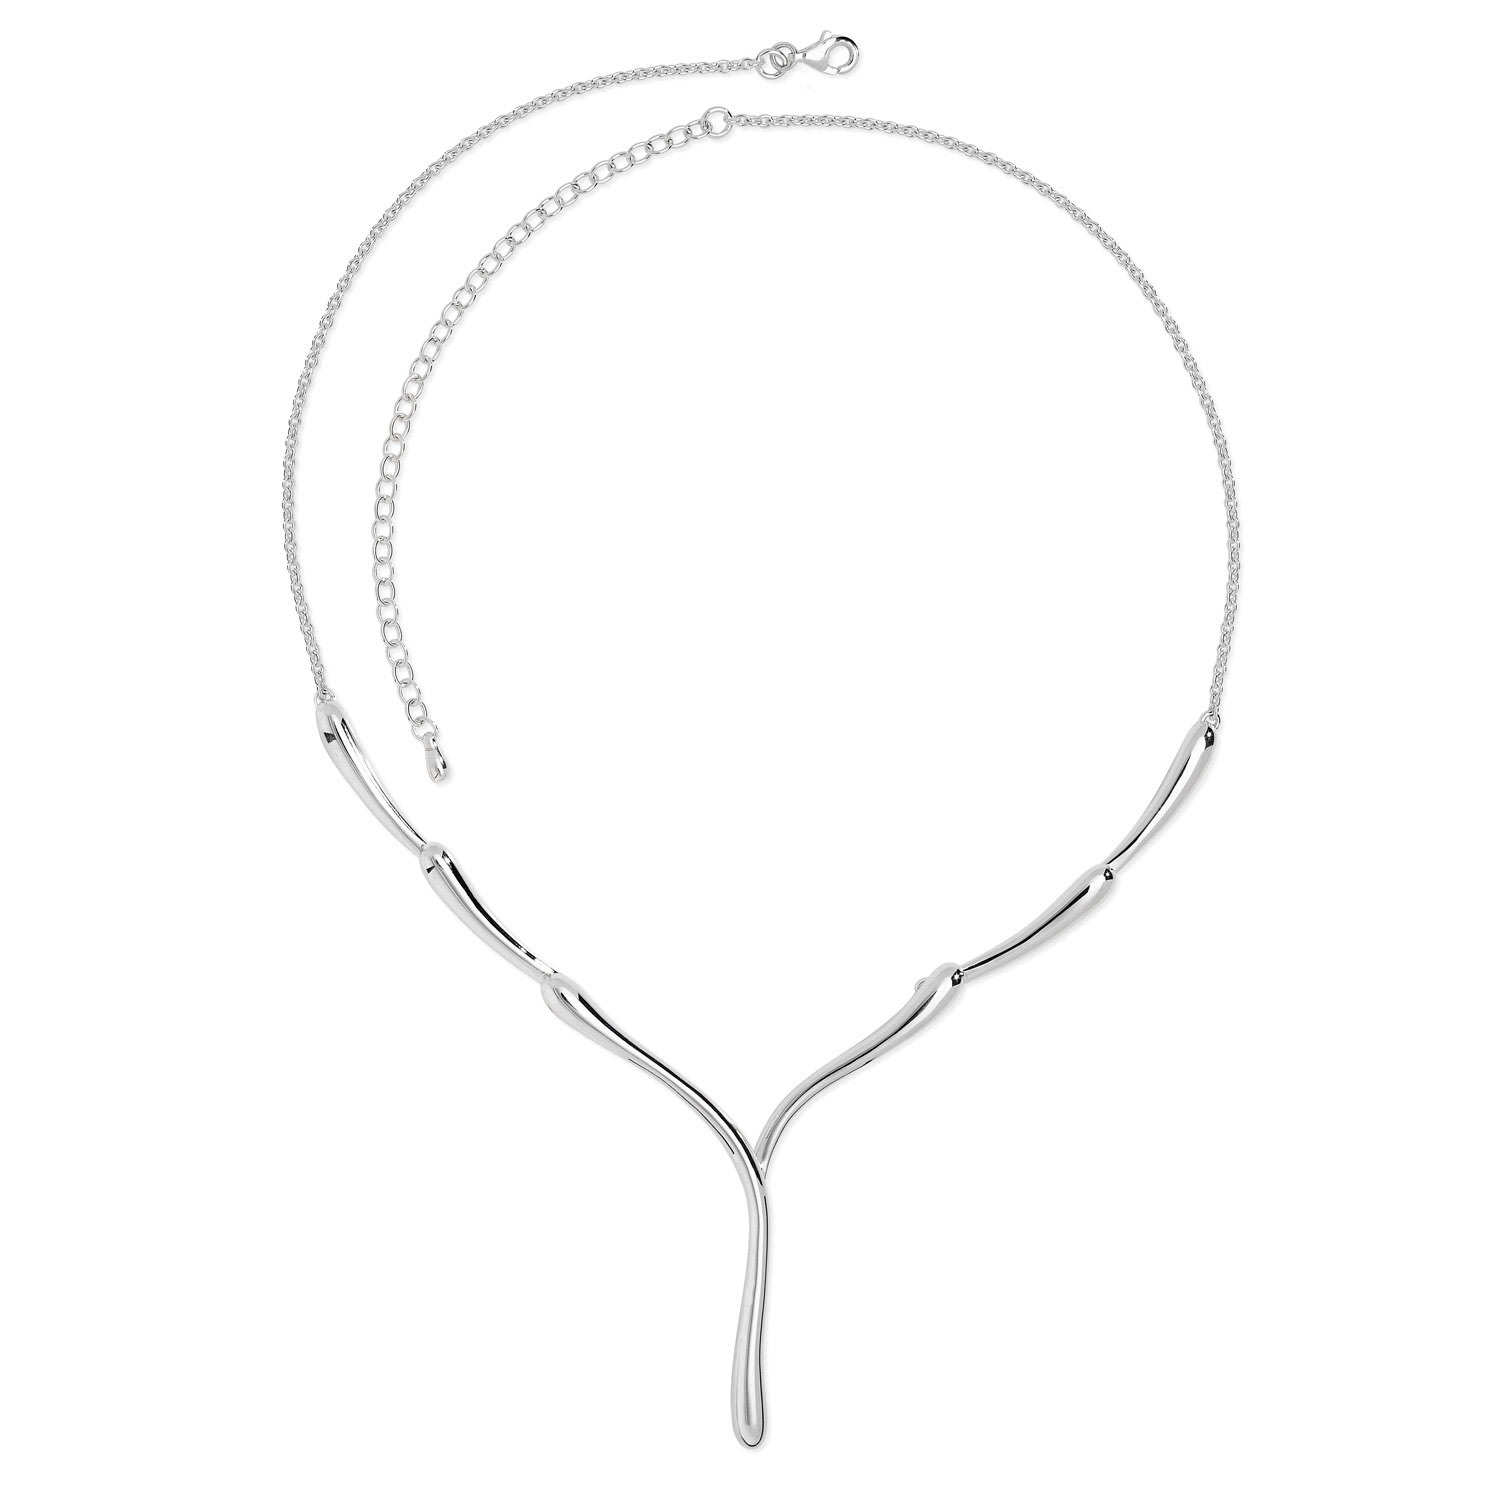 Lucy Quartermaine Women's Sterling Silver Single Melting Necklace, Award Winning Designer Jewellery By Lucy Quartermai